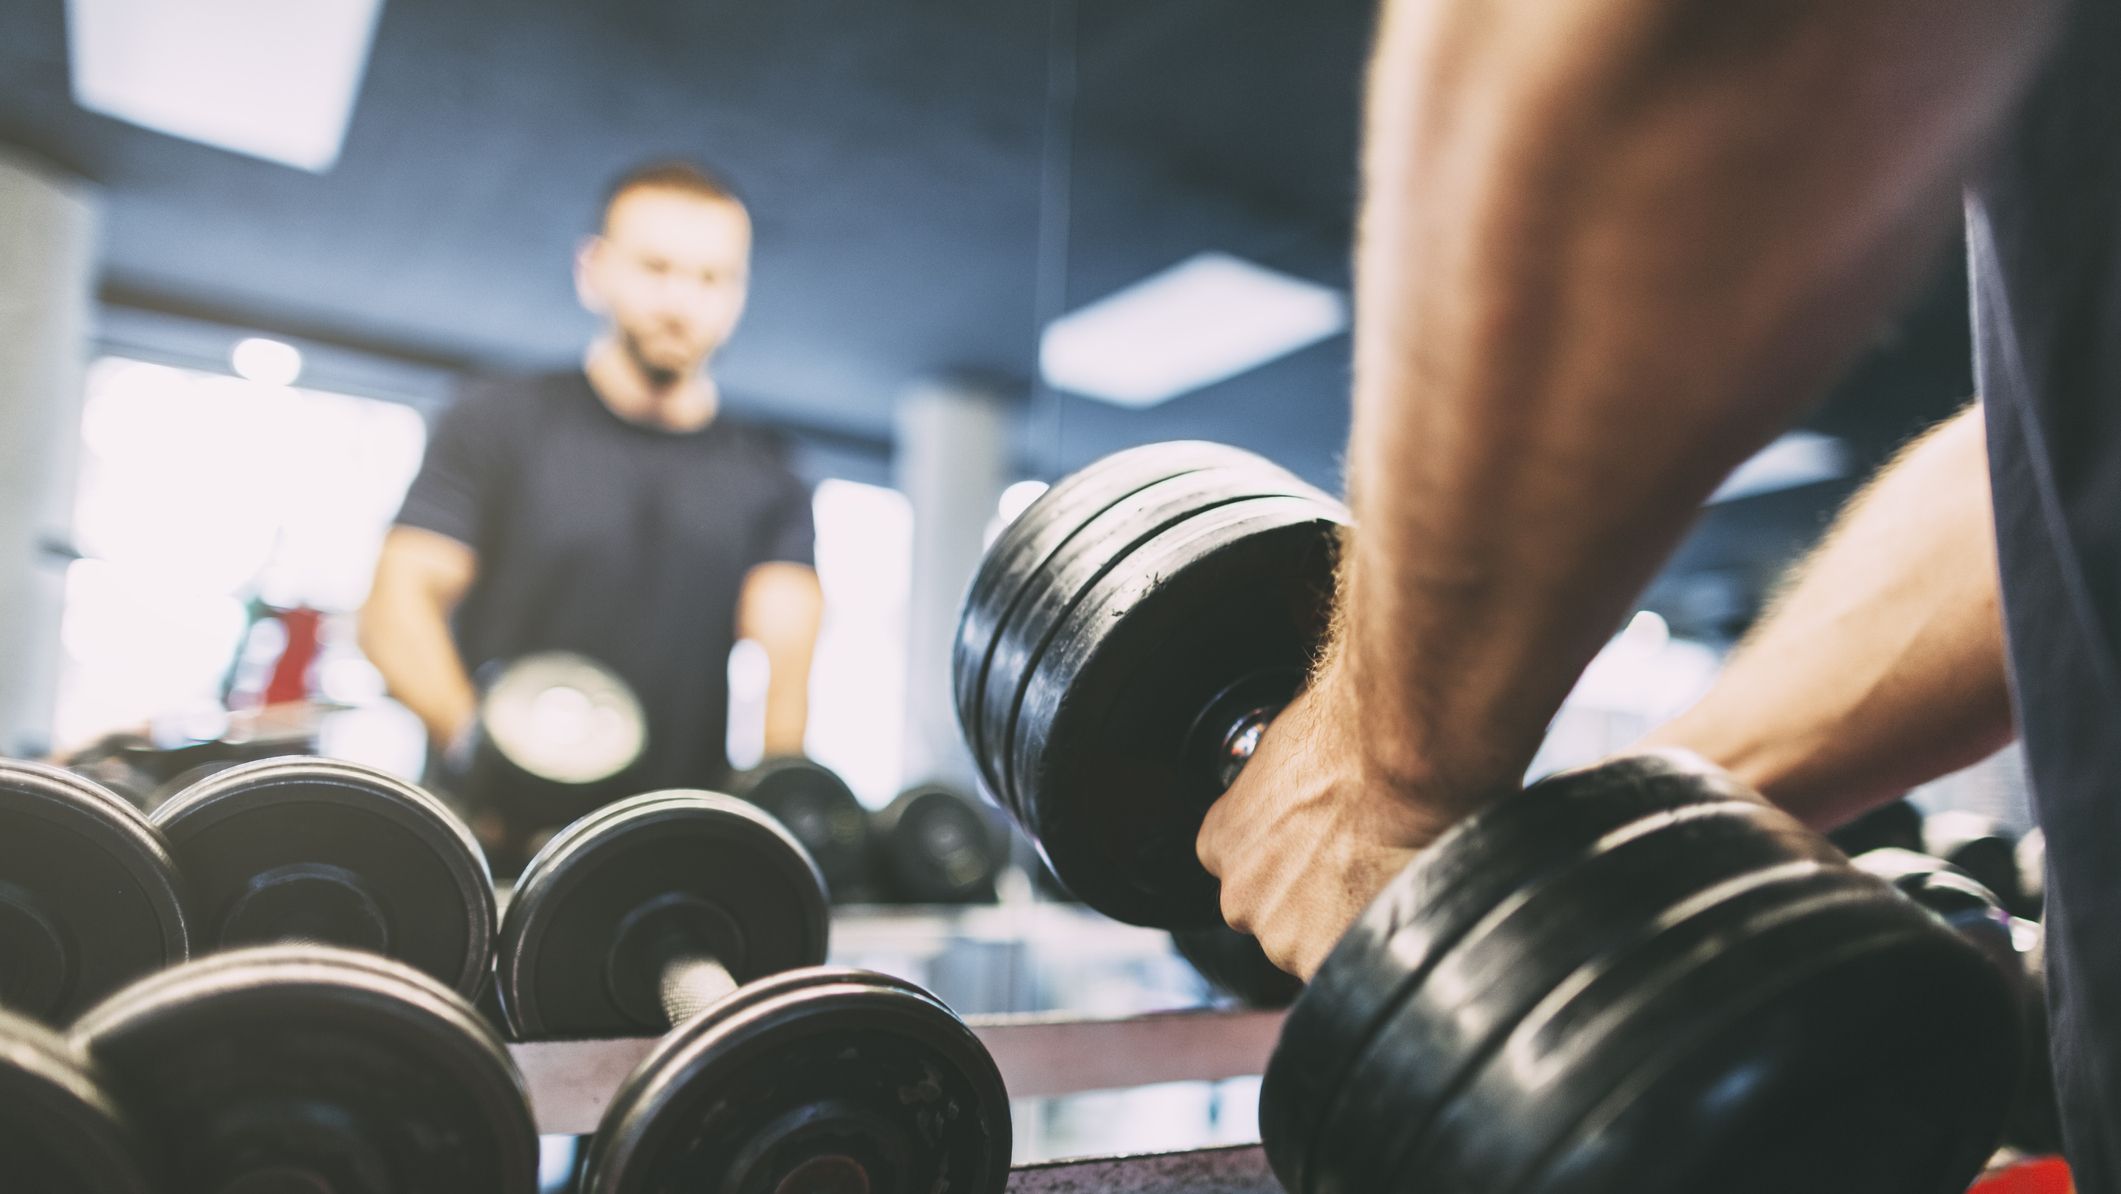 Heavier Weight or High Reps: Which Is Better for Strength Training?